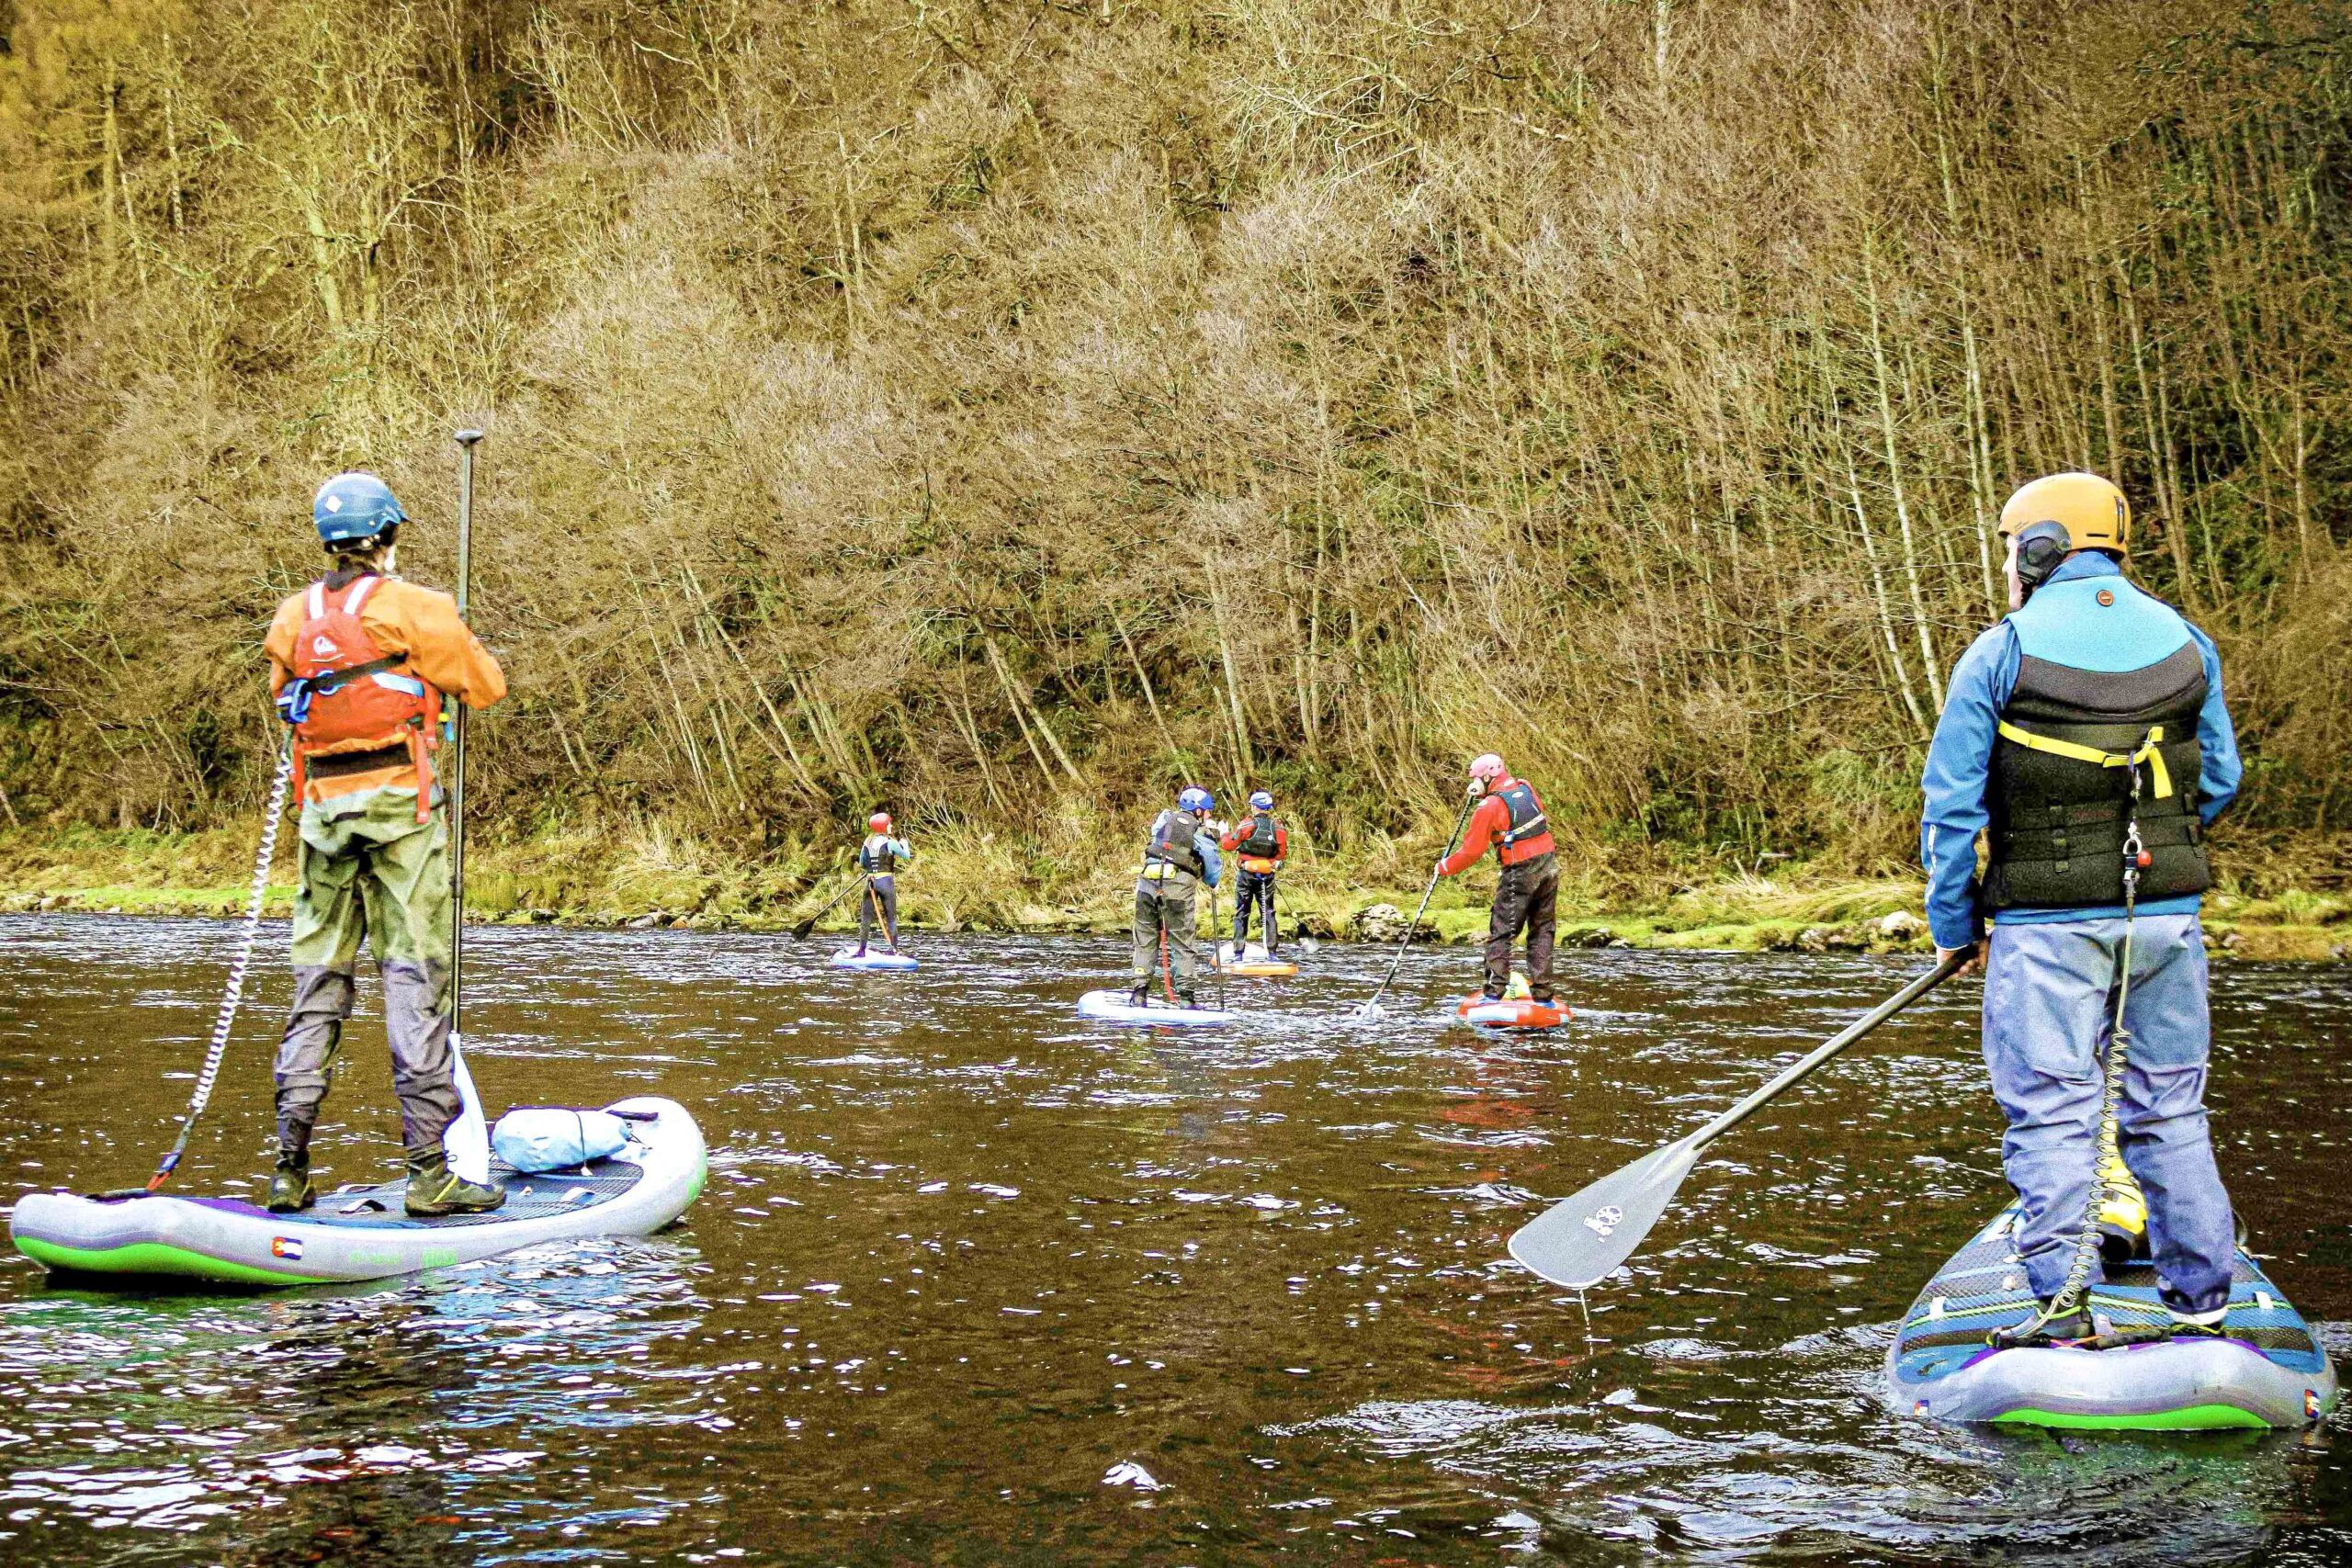 Paddlesports Safety And Rescue Course British canoeing ngb award